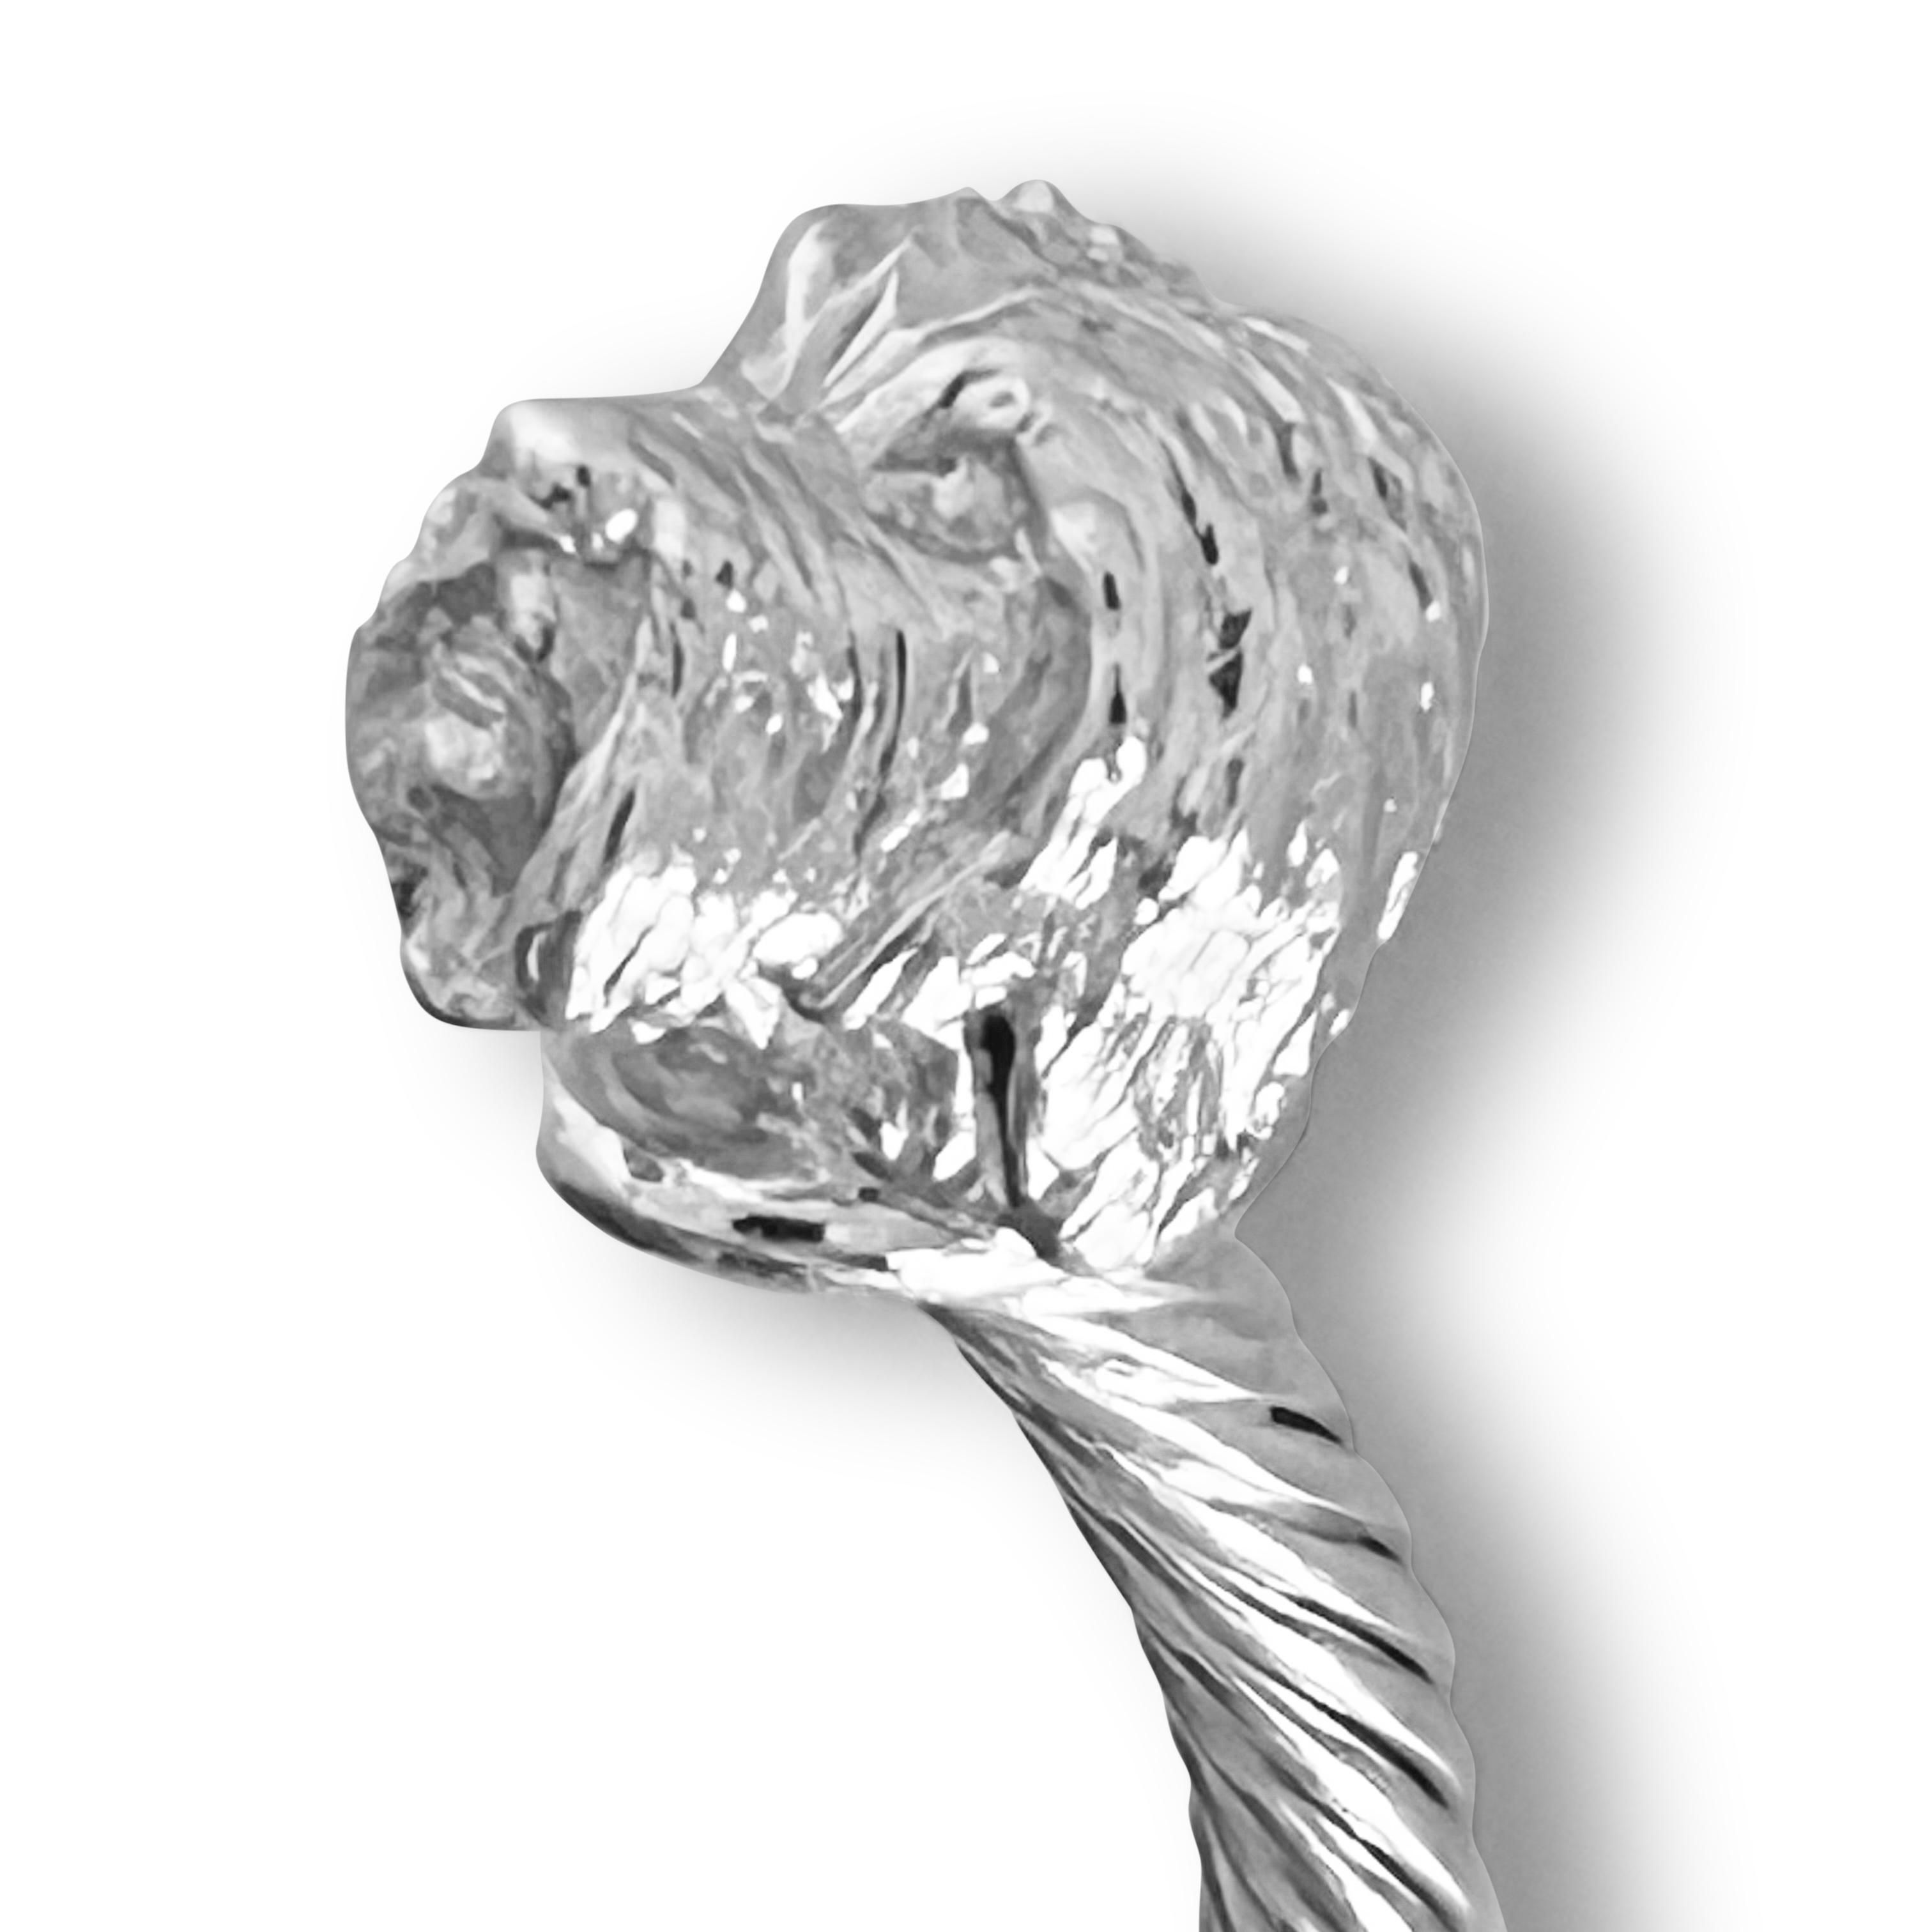 Intricately hand carved dog miniatures of Tibetan Terrier Heads (details in photos) on a sterling silver twisted bangle are made by England’s Paul Eaton who is possibly the world's best miniature sculptor of dogs and animals and a master